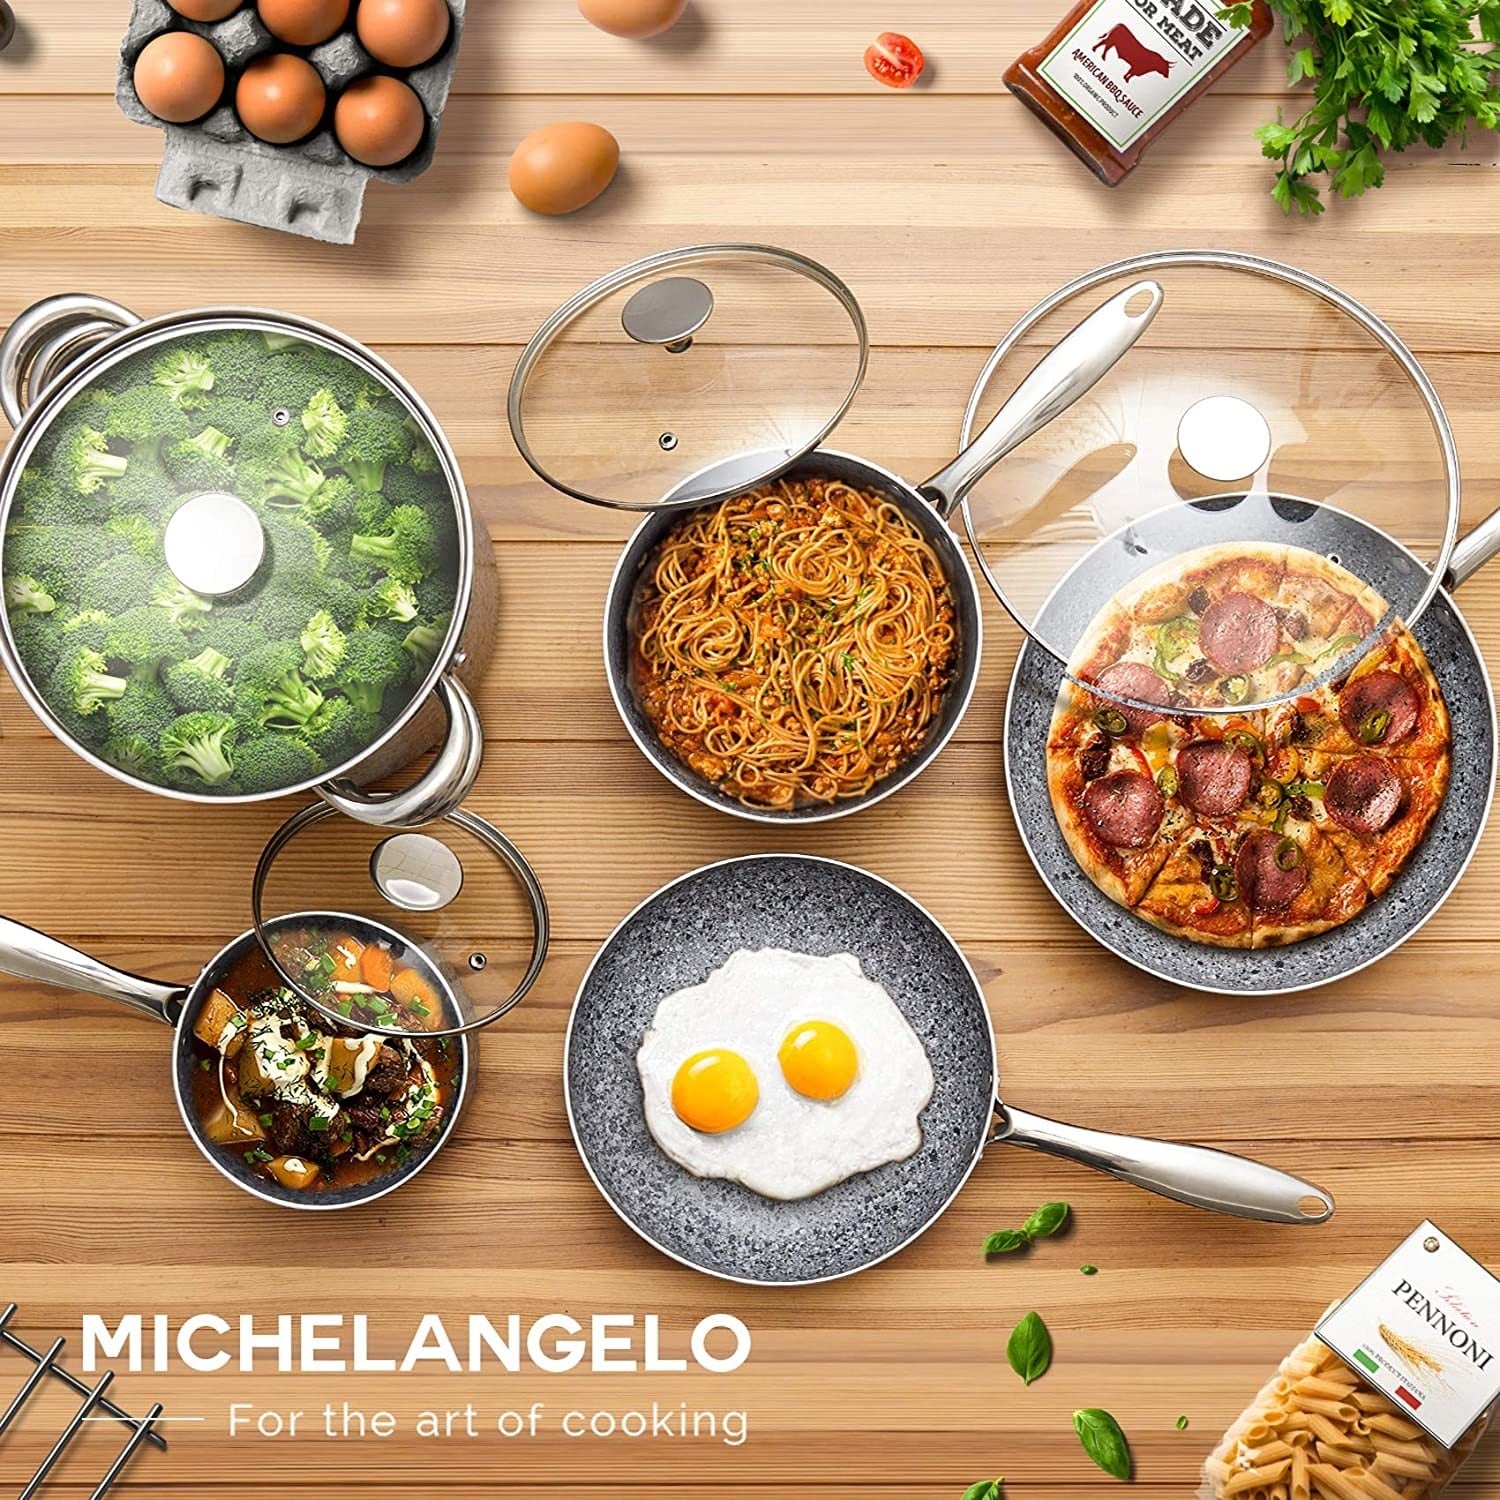 MICHELANGELO 10 Inch Frying Pan with Lid, Hard Anodized Frying Pan  Nonstick, Granite Frying Pans Nonstick with Lids, 10 Inch Induction Skillet